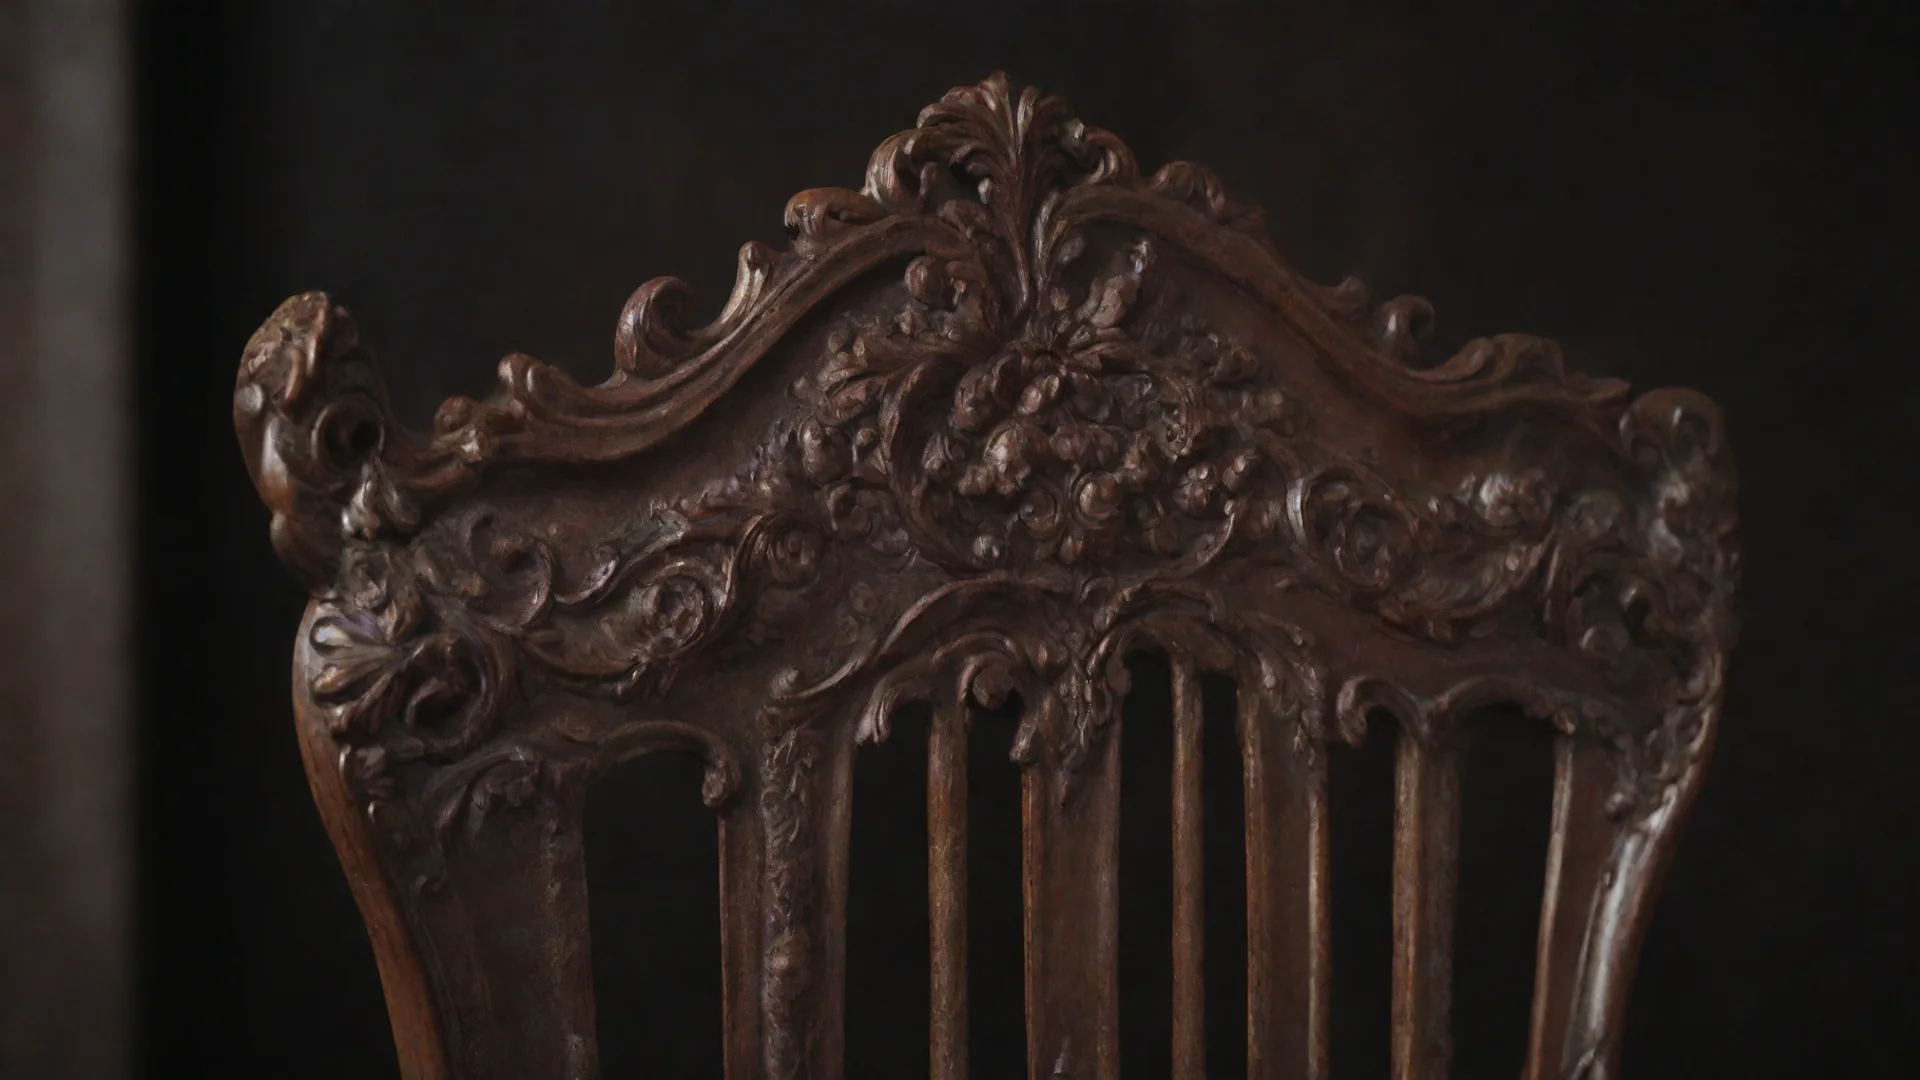 detail view of an ornate chair back dark brown at the edge blurred with high craftsmanship and dark background hdwidescreen